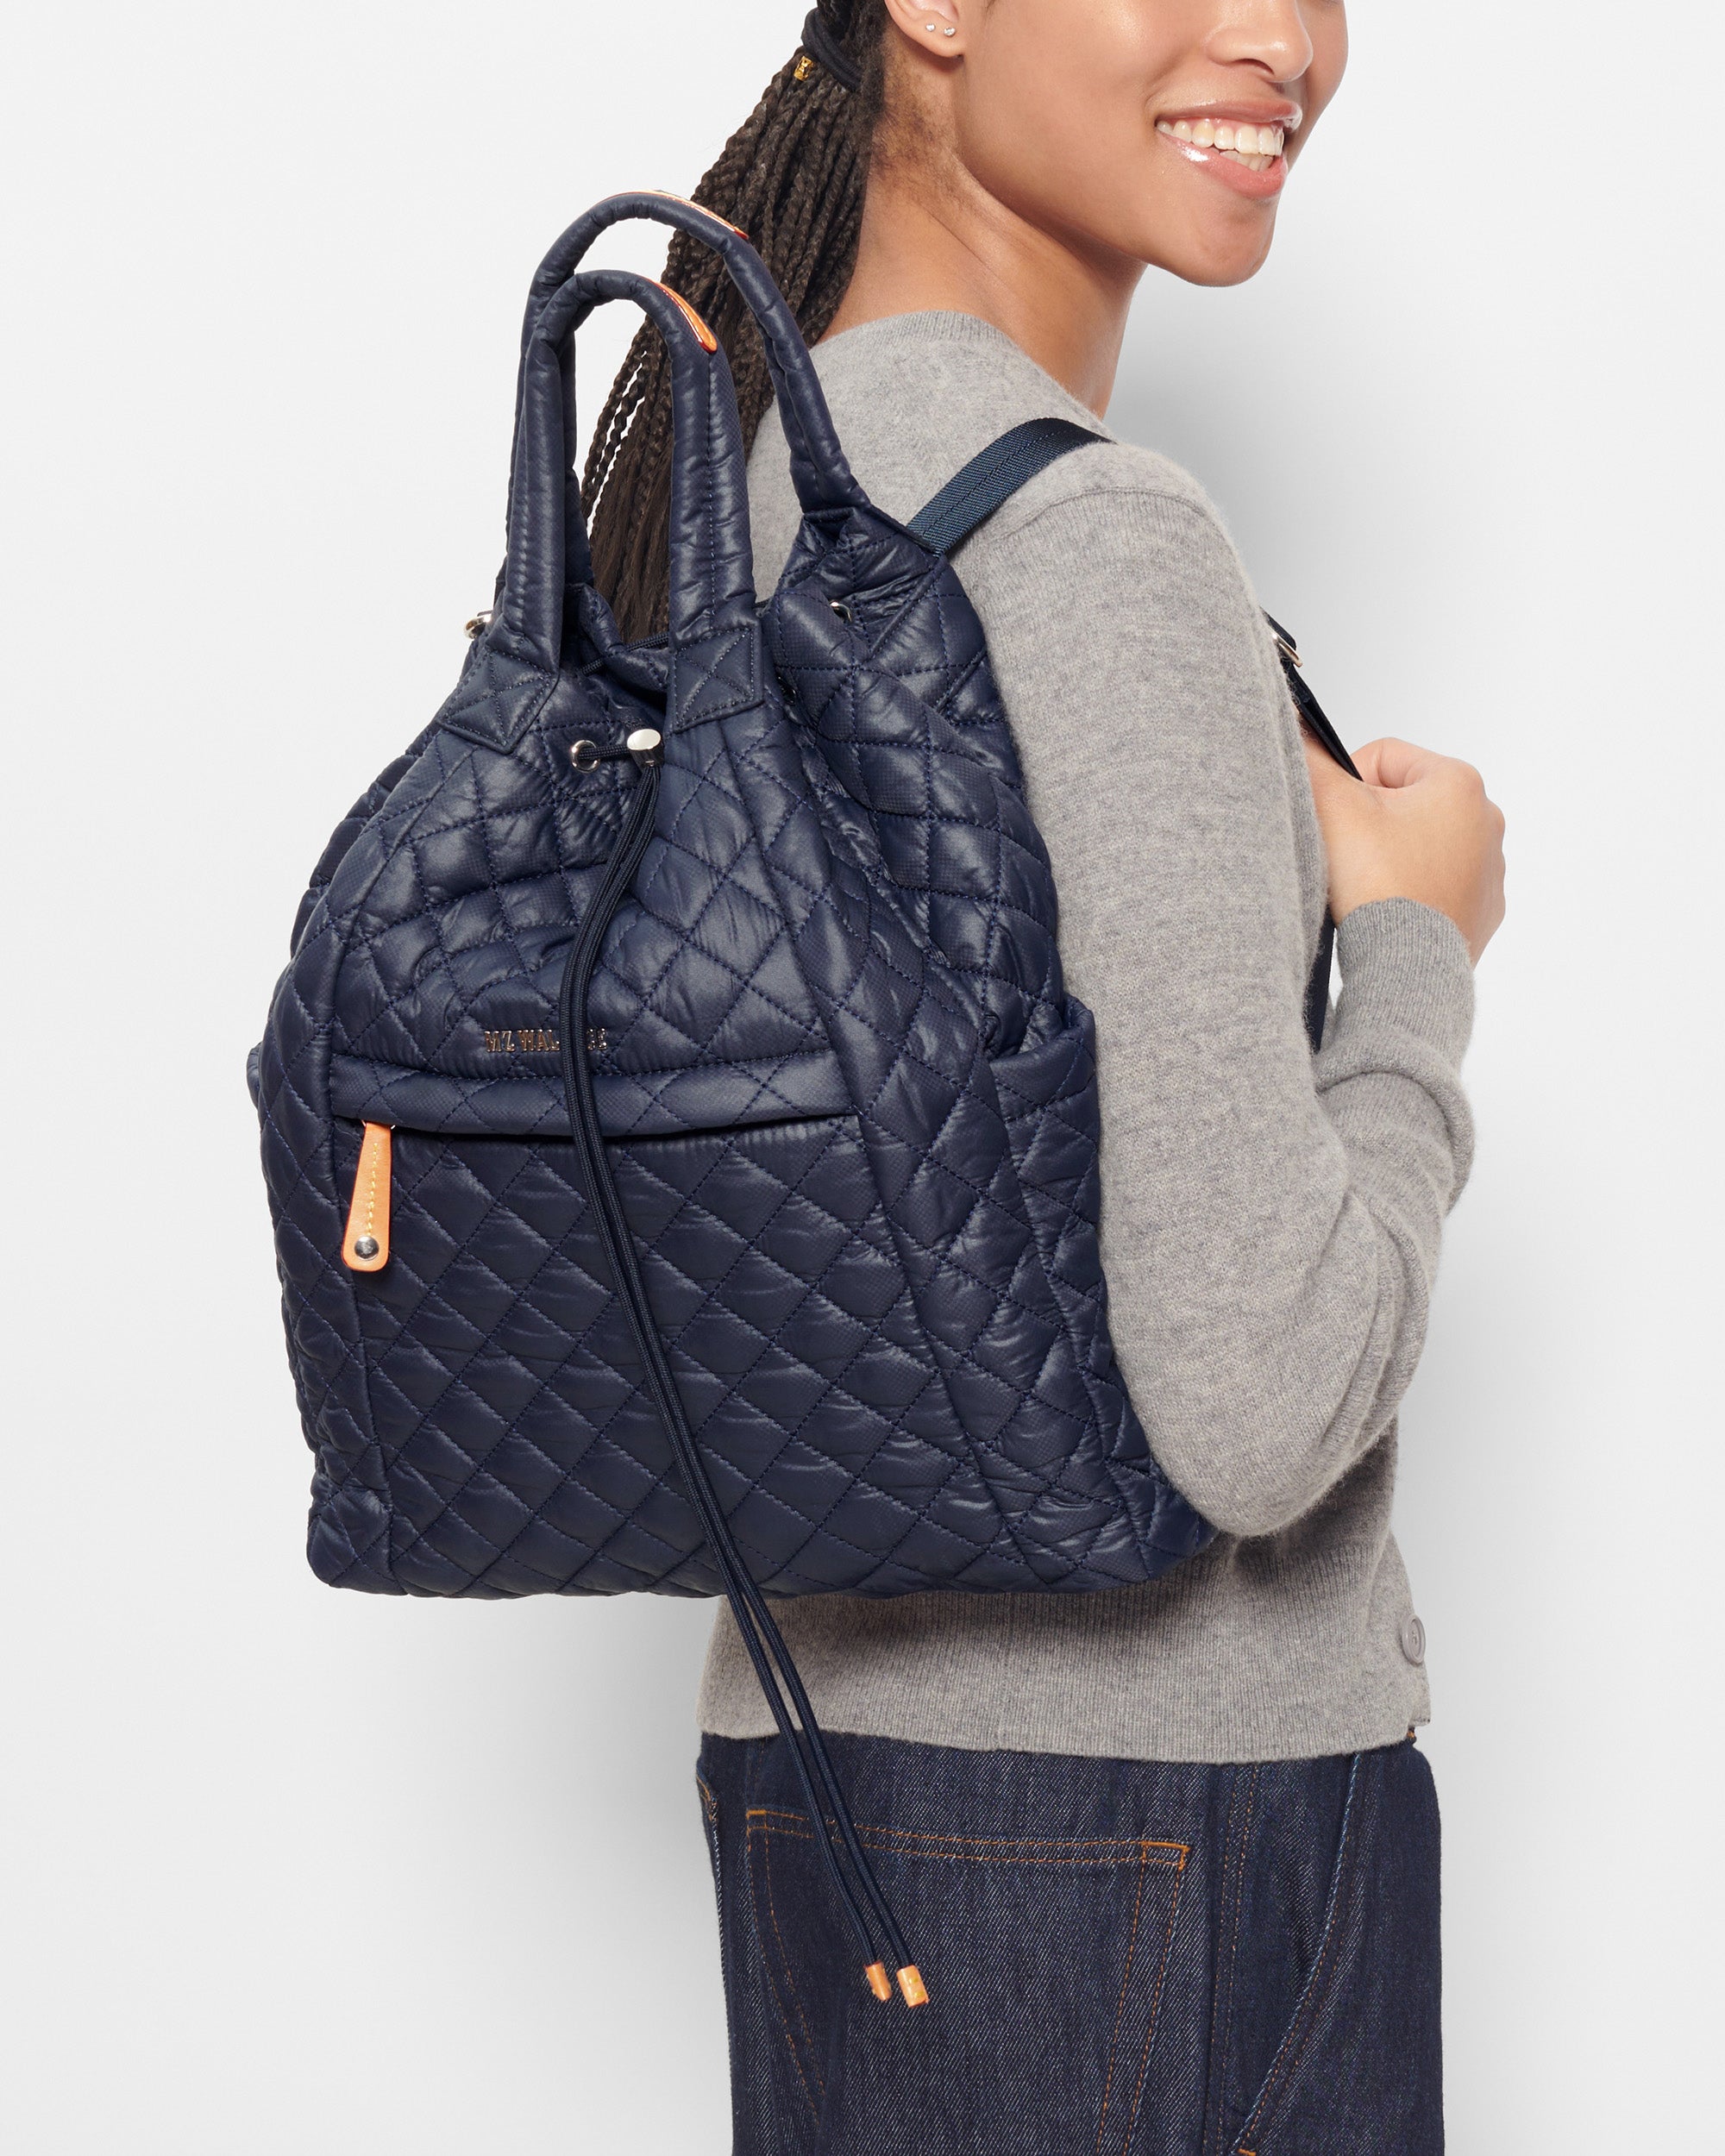 City Metro Backpack - MZ Wallace – Cosmos Boutique New Jersey